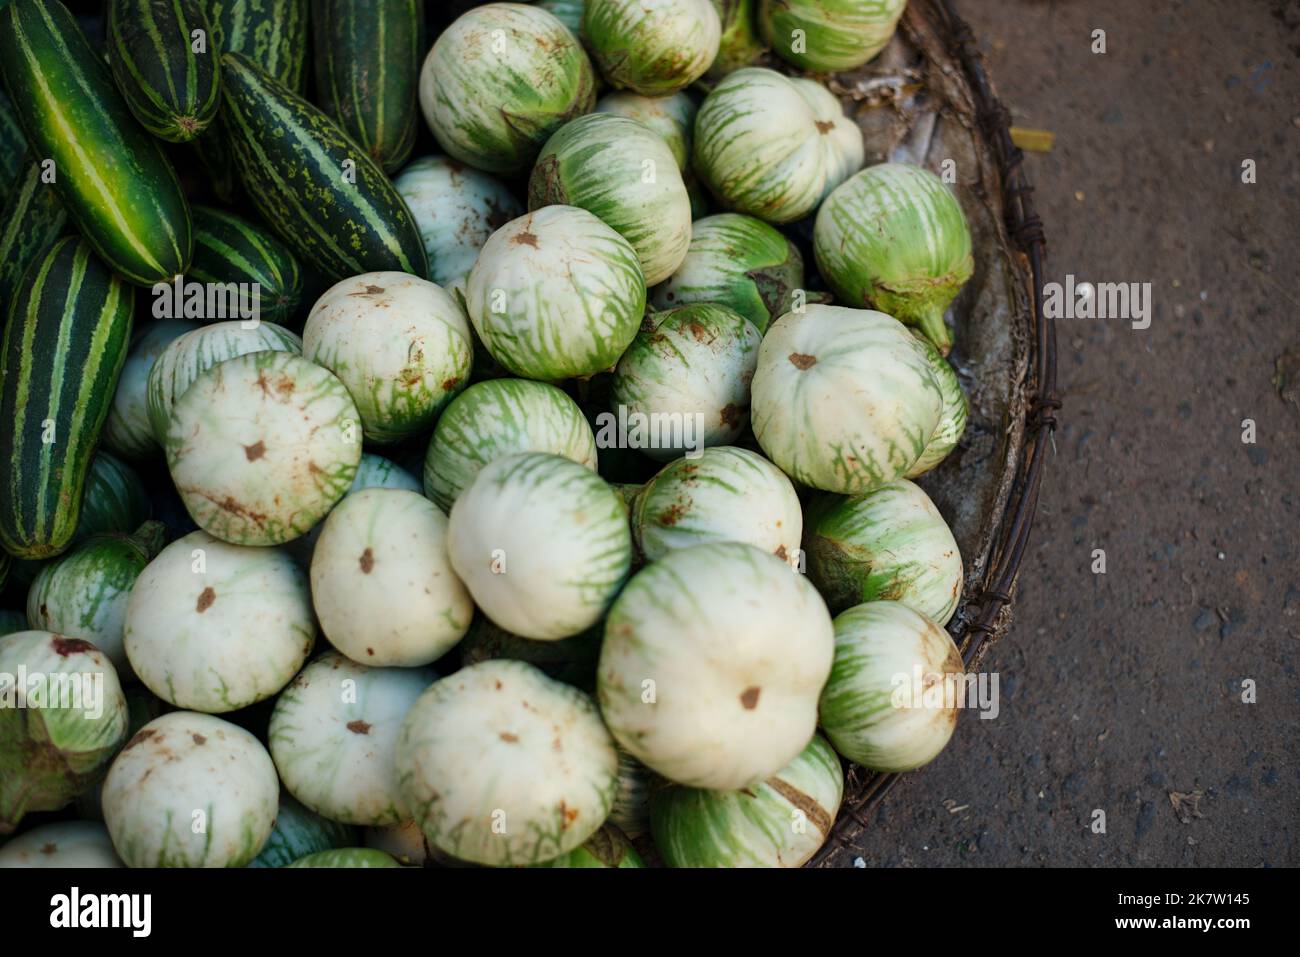 Basket of vegetables as eggplant, squash from Vietnamese vendor, popular Vietnam agriculture product Stock Photo